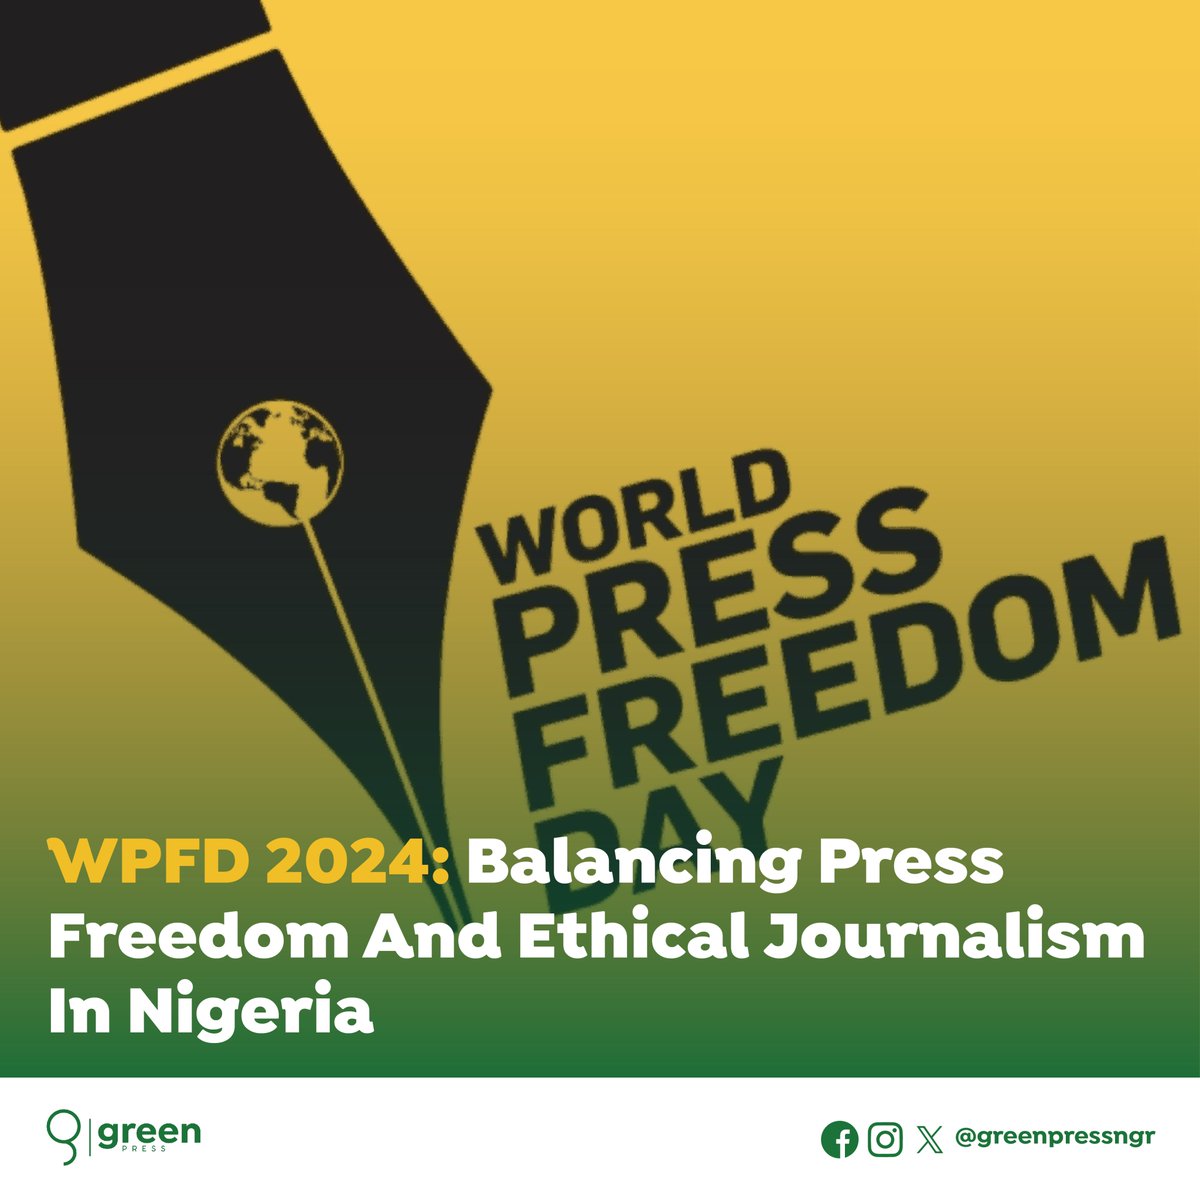 WPFD 2024: Balancing Press Freedom and Ethical Journalism in Nigeria 

Every year on May 3rd, the world comes together to celebrate World Press Freedom Day (WPFD).  This international observance highlights the importance of a free and independent press for a healthy democracy.